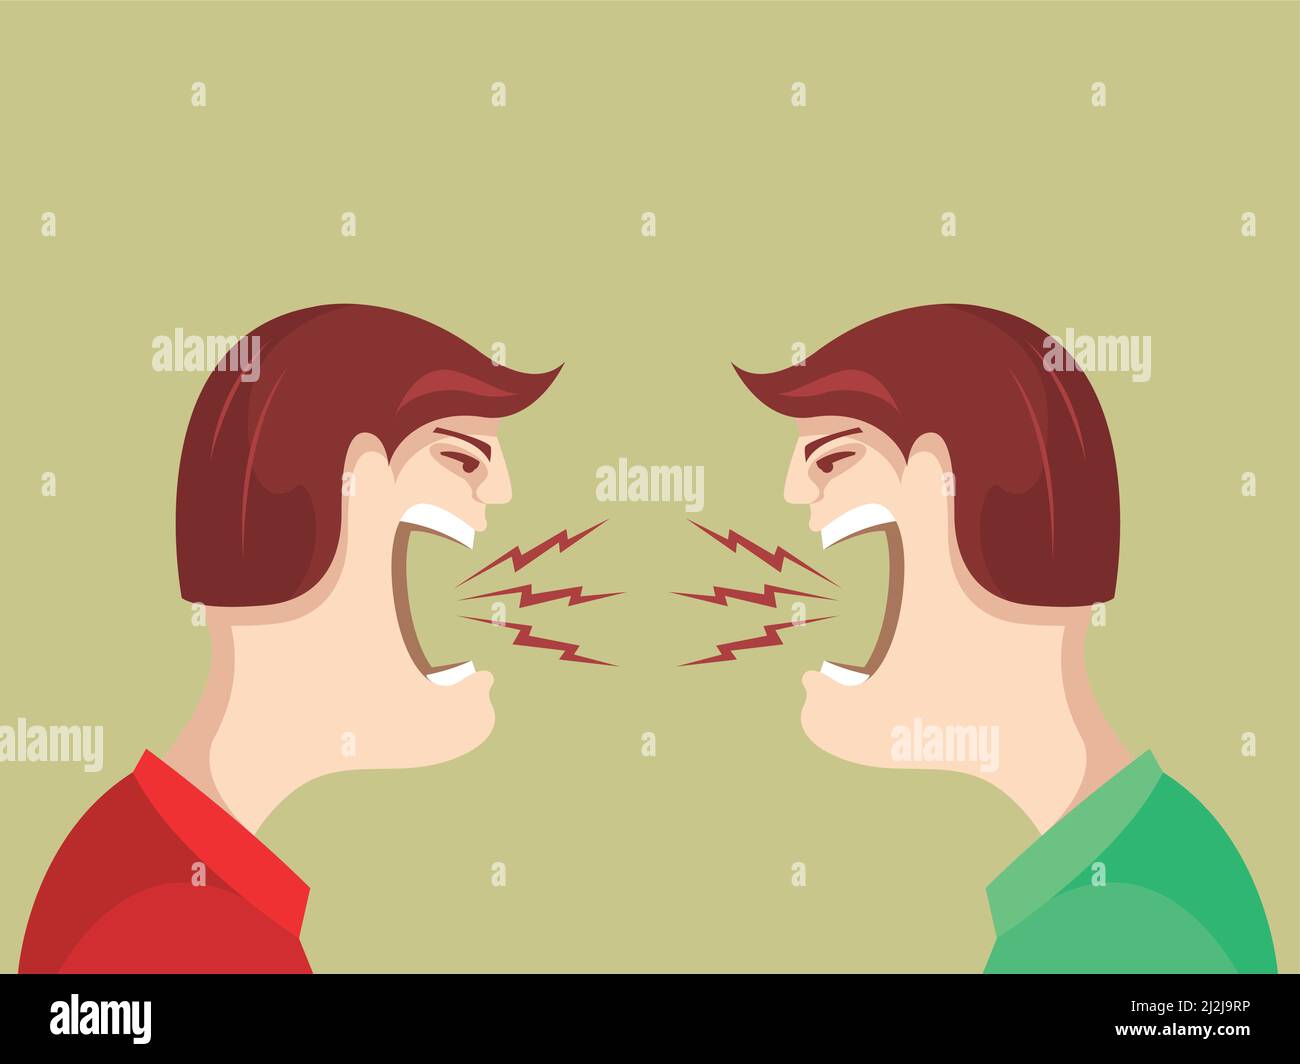 Opponents quarrel, screaming people swear, family scandal or friends argument, vector Stock Vector